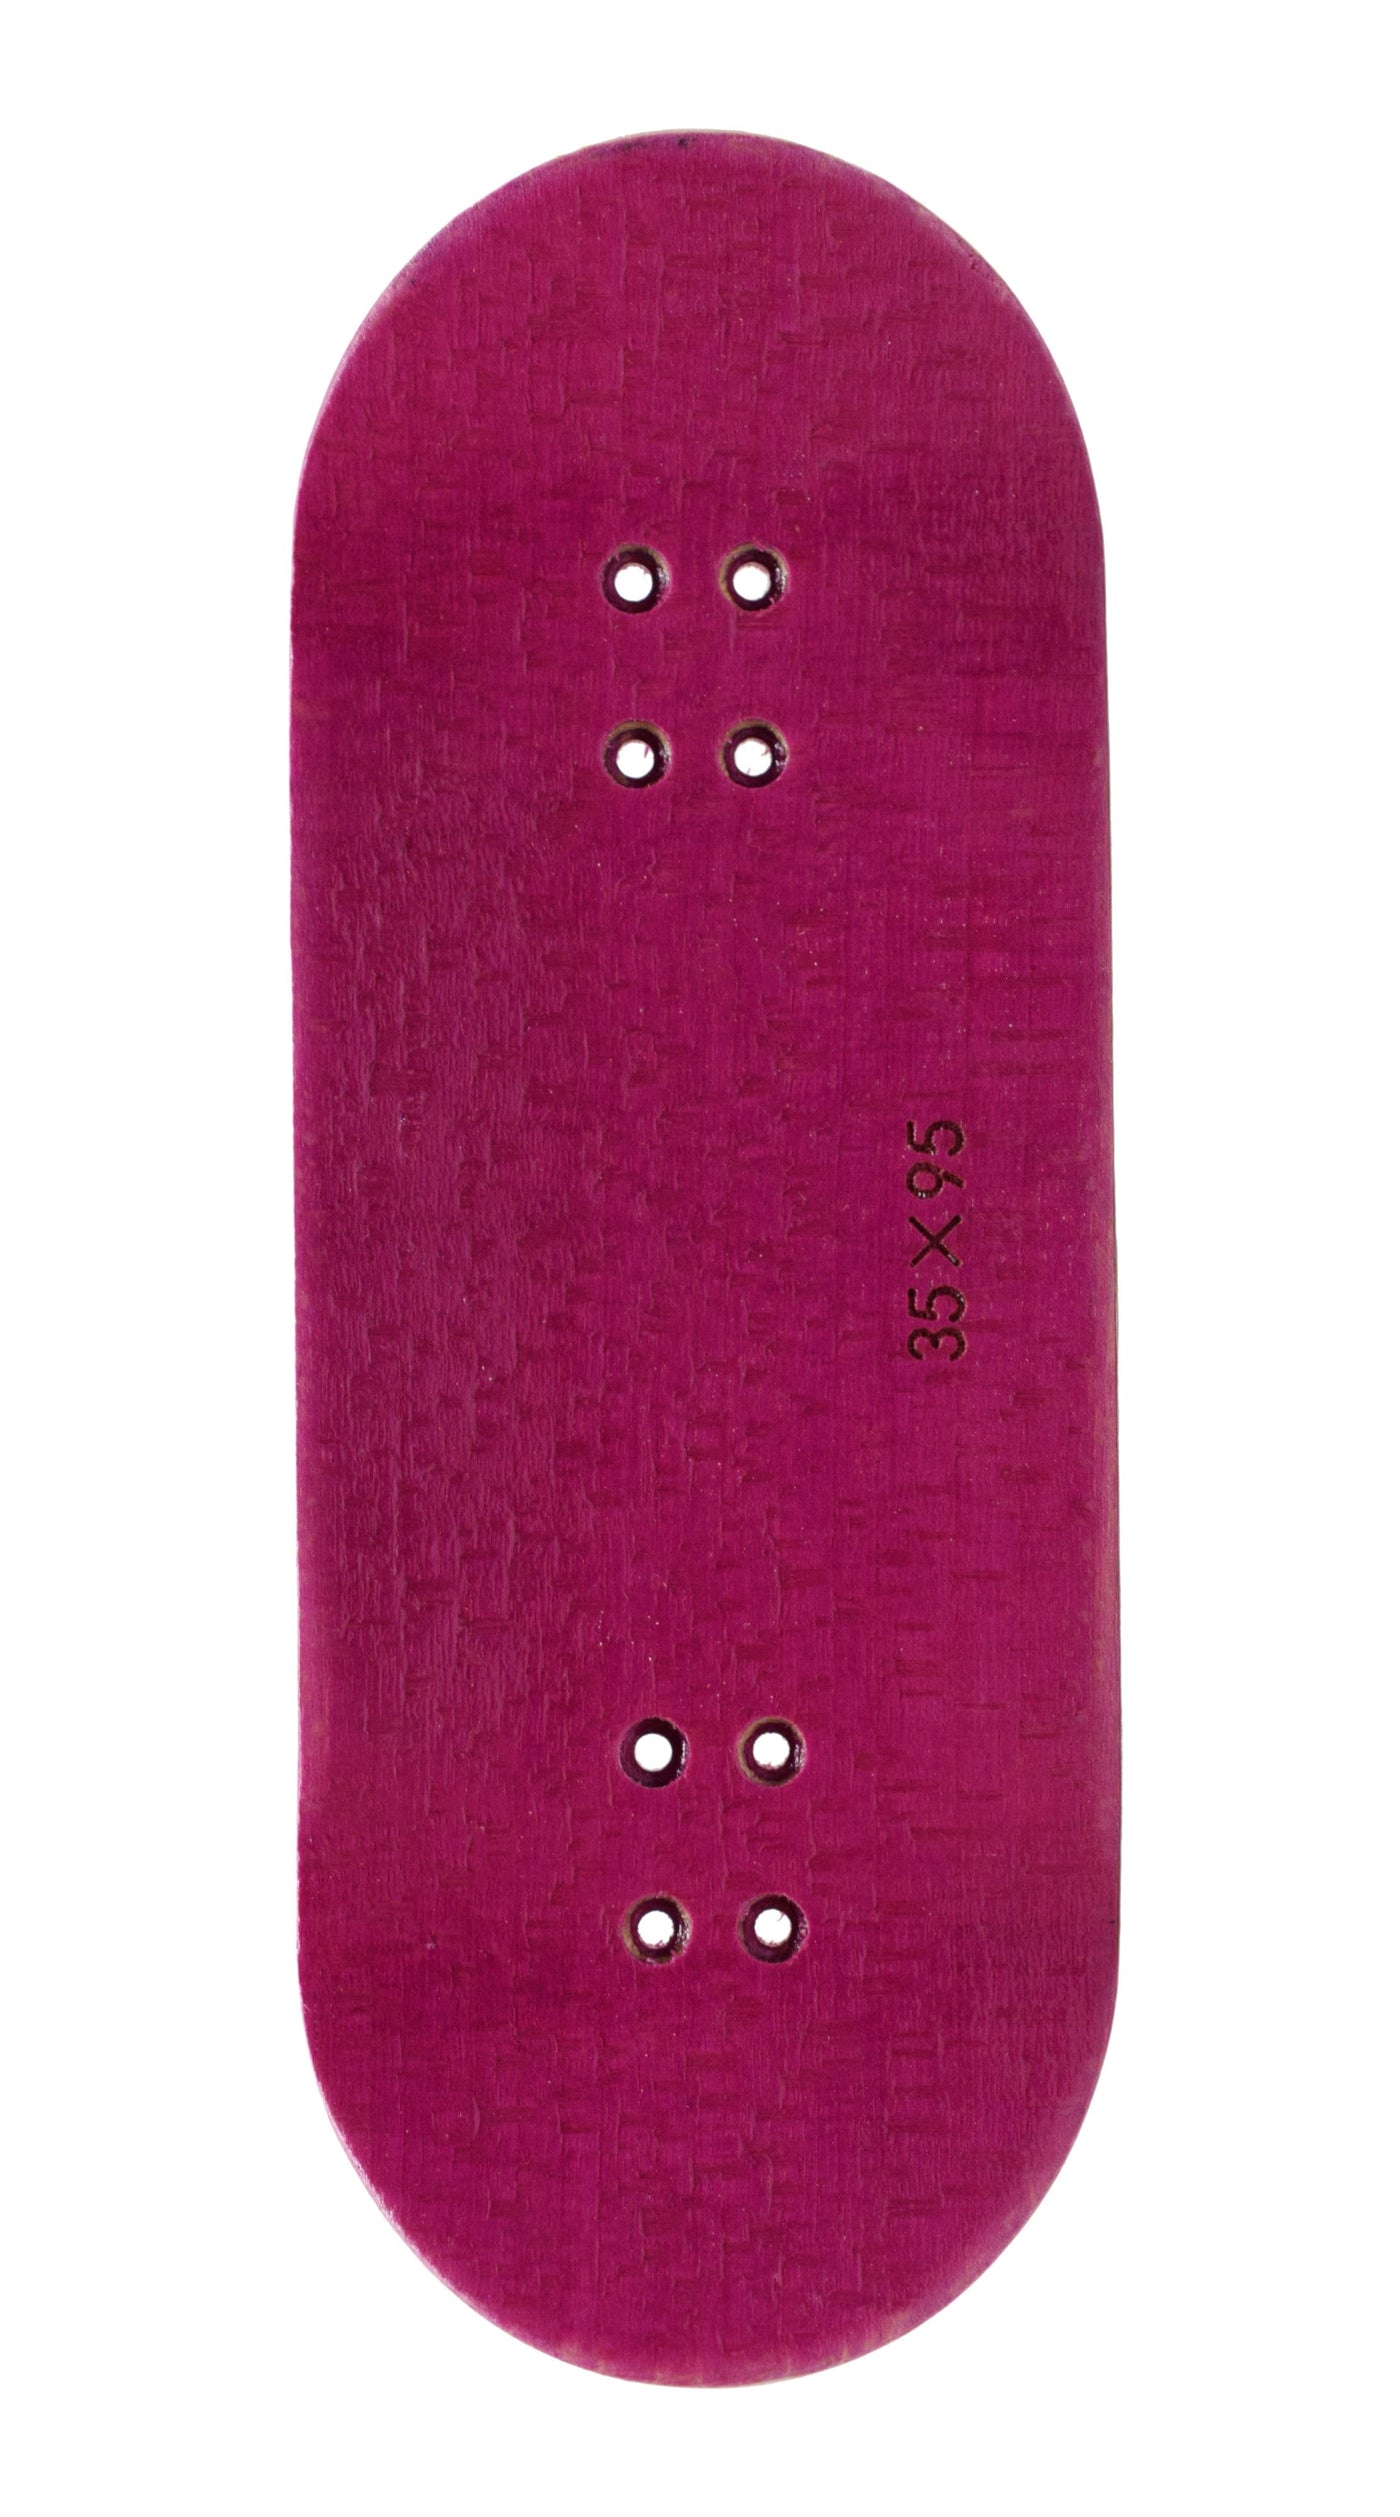 Teak Tuning PROlific Wooden 5 Ply Fingerboard Deck 35x95mm - Pink Flamingo - with Color Matching Mid Ply